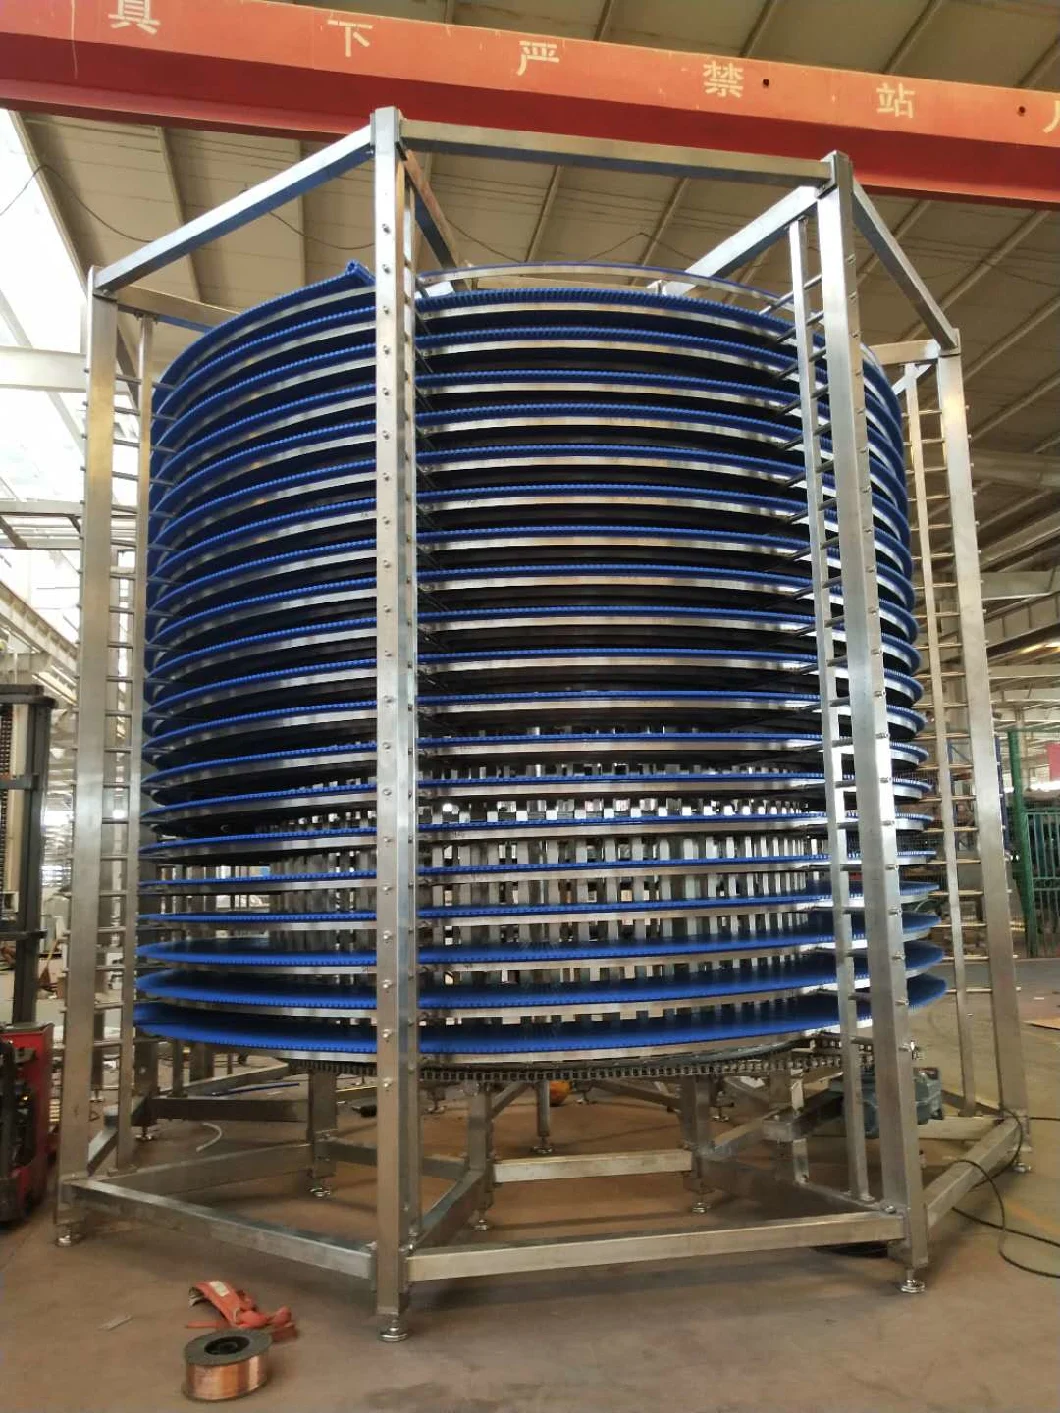 Bakery Factory Industrial Spiral Cooling Tower Conveyor Machine for Cooler Bread Baking